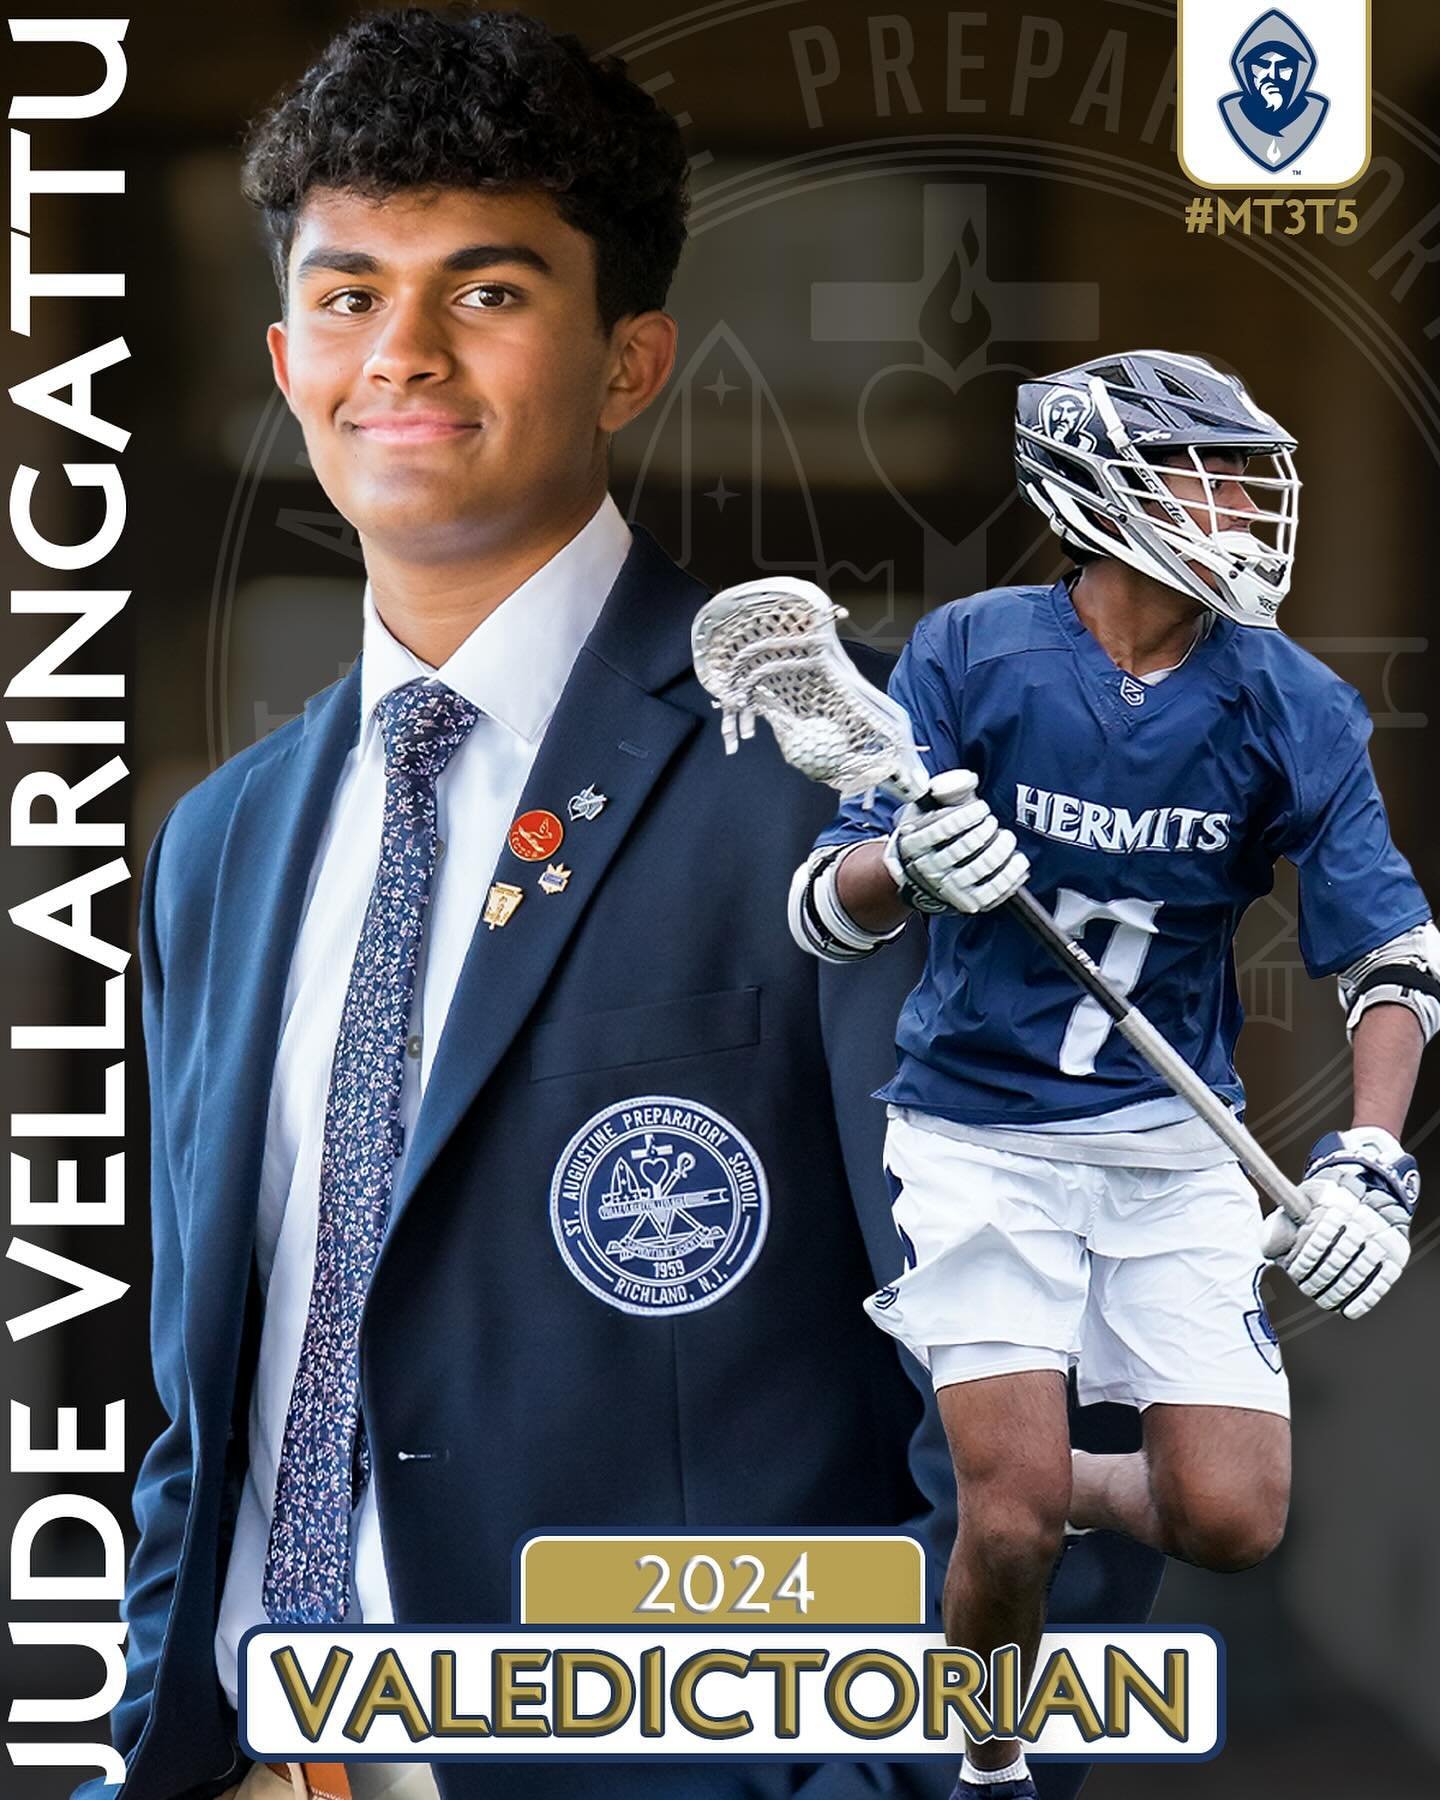 Jude Vellaringattu &lsquo;24 (Medford, NJ) has officially been named the @staugustineprep Class of 2024 Valedictorian!

Jude&rsquo;s elite work ethic in all areas of life have paved the way for this prestigious honor. From the classroom to the field 